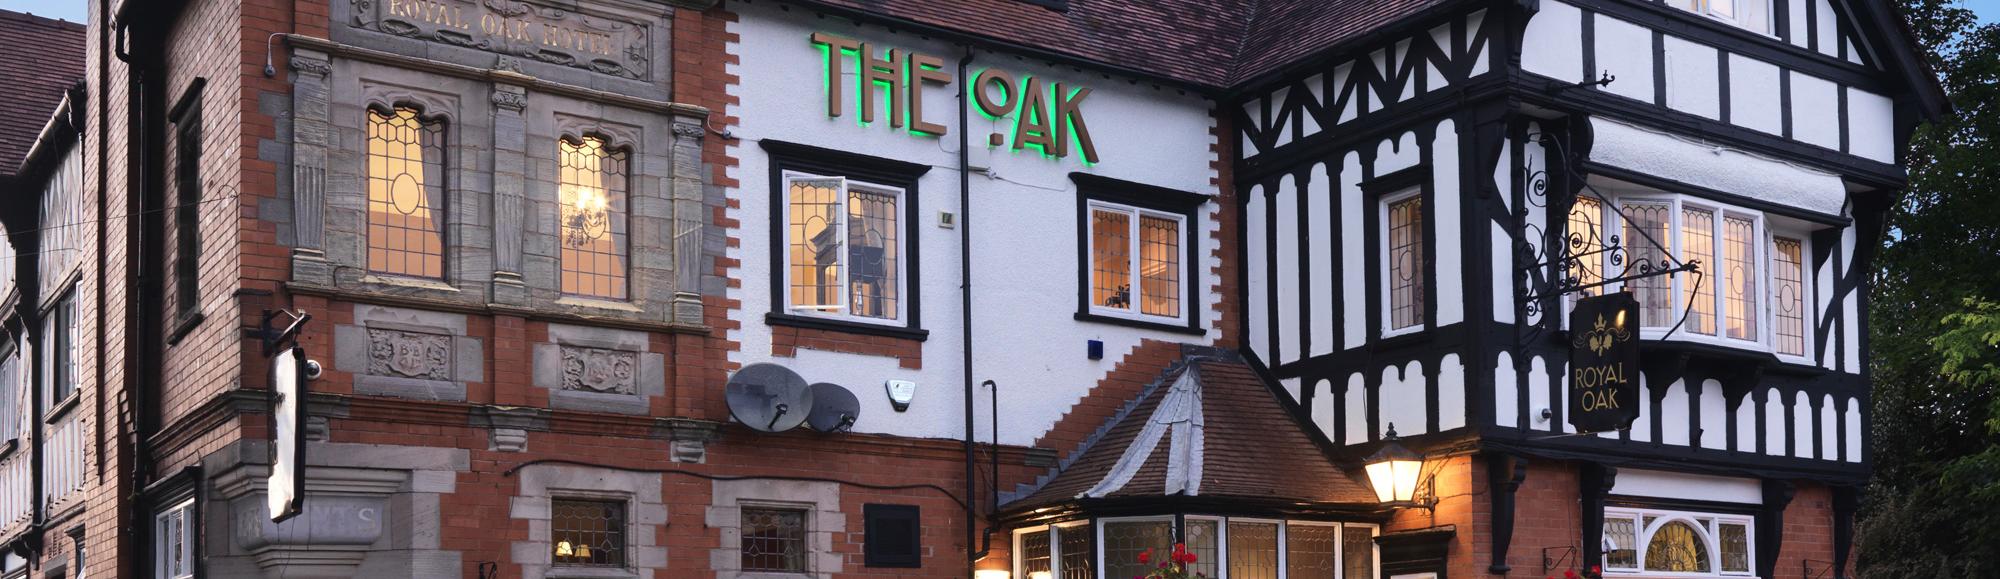 The Oak: About